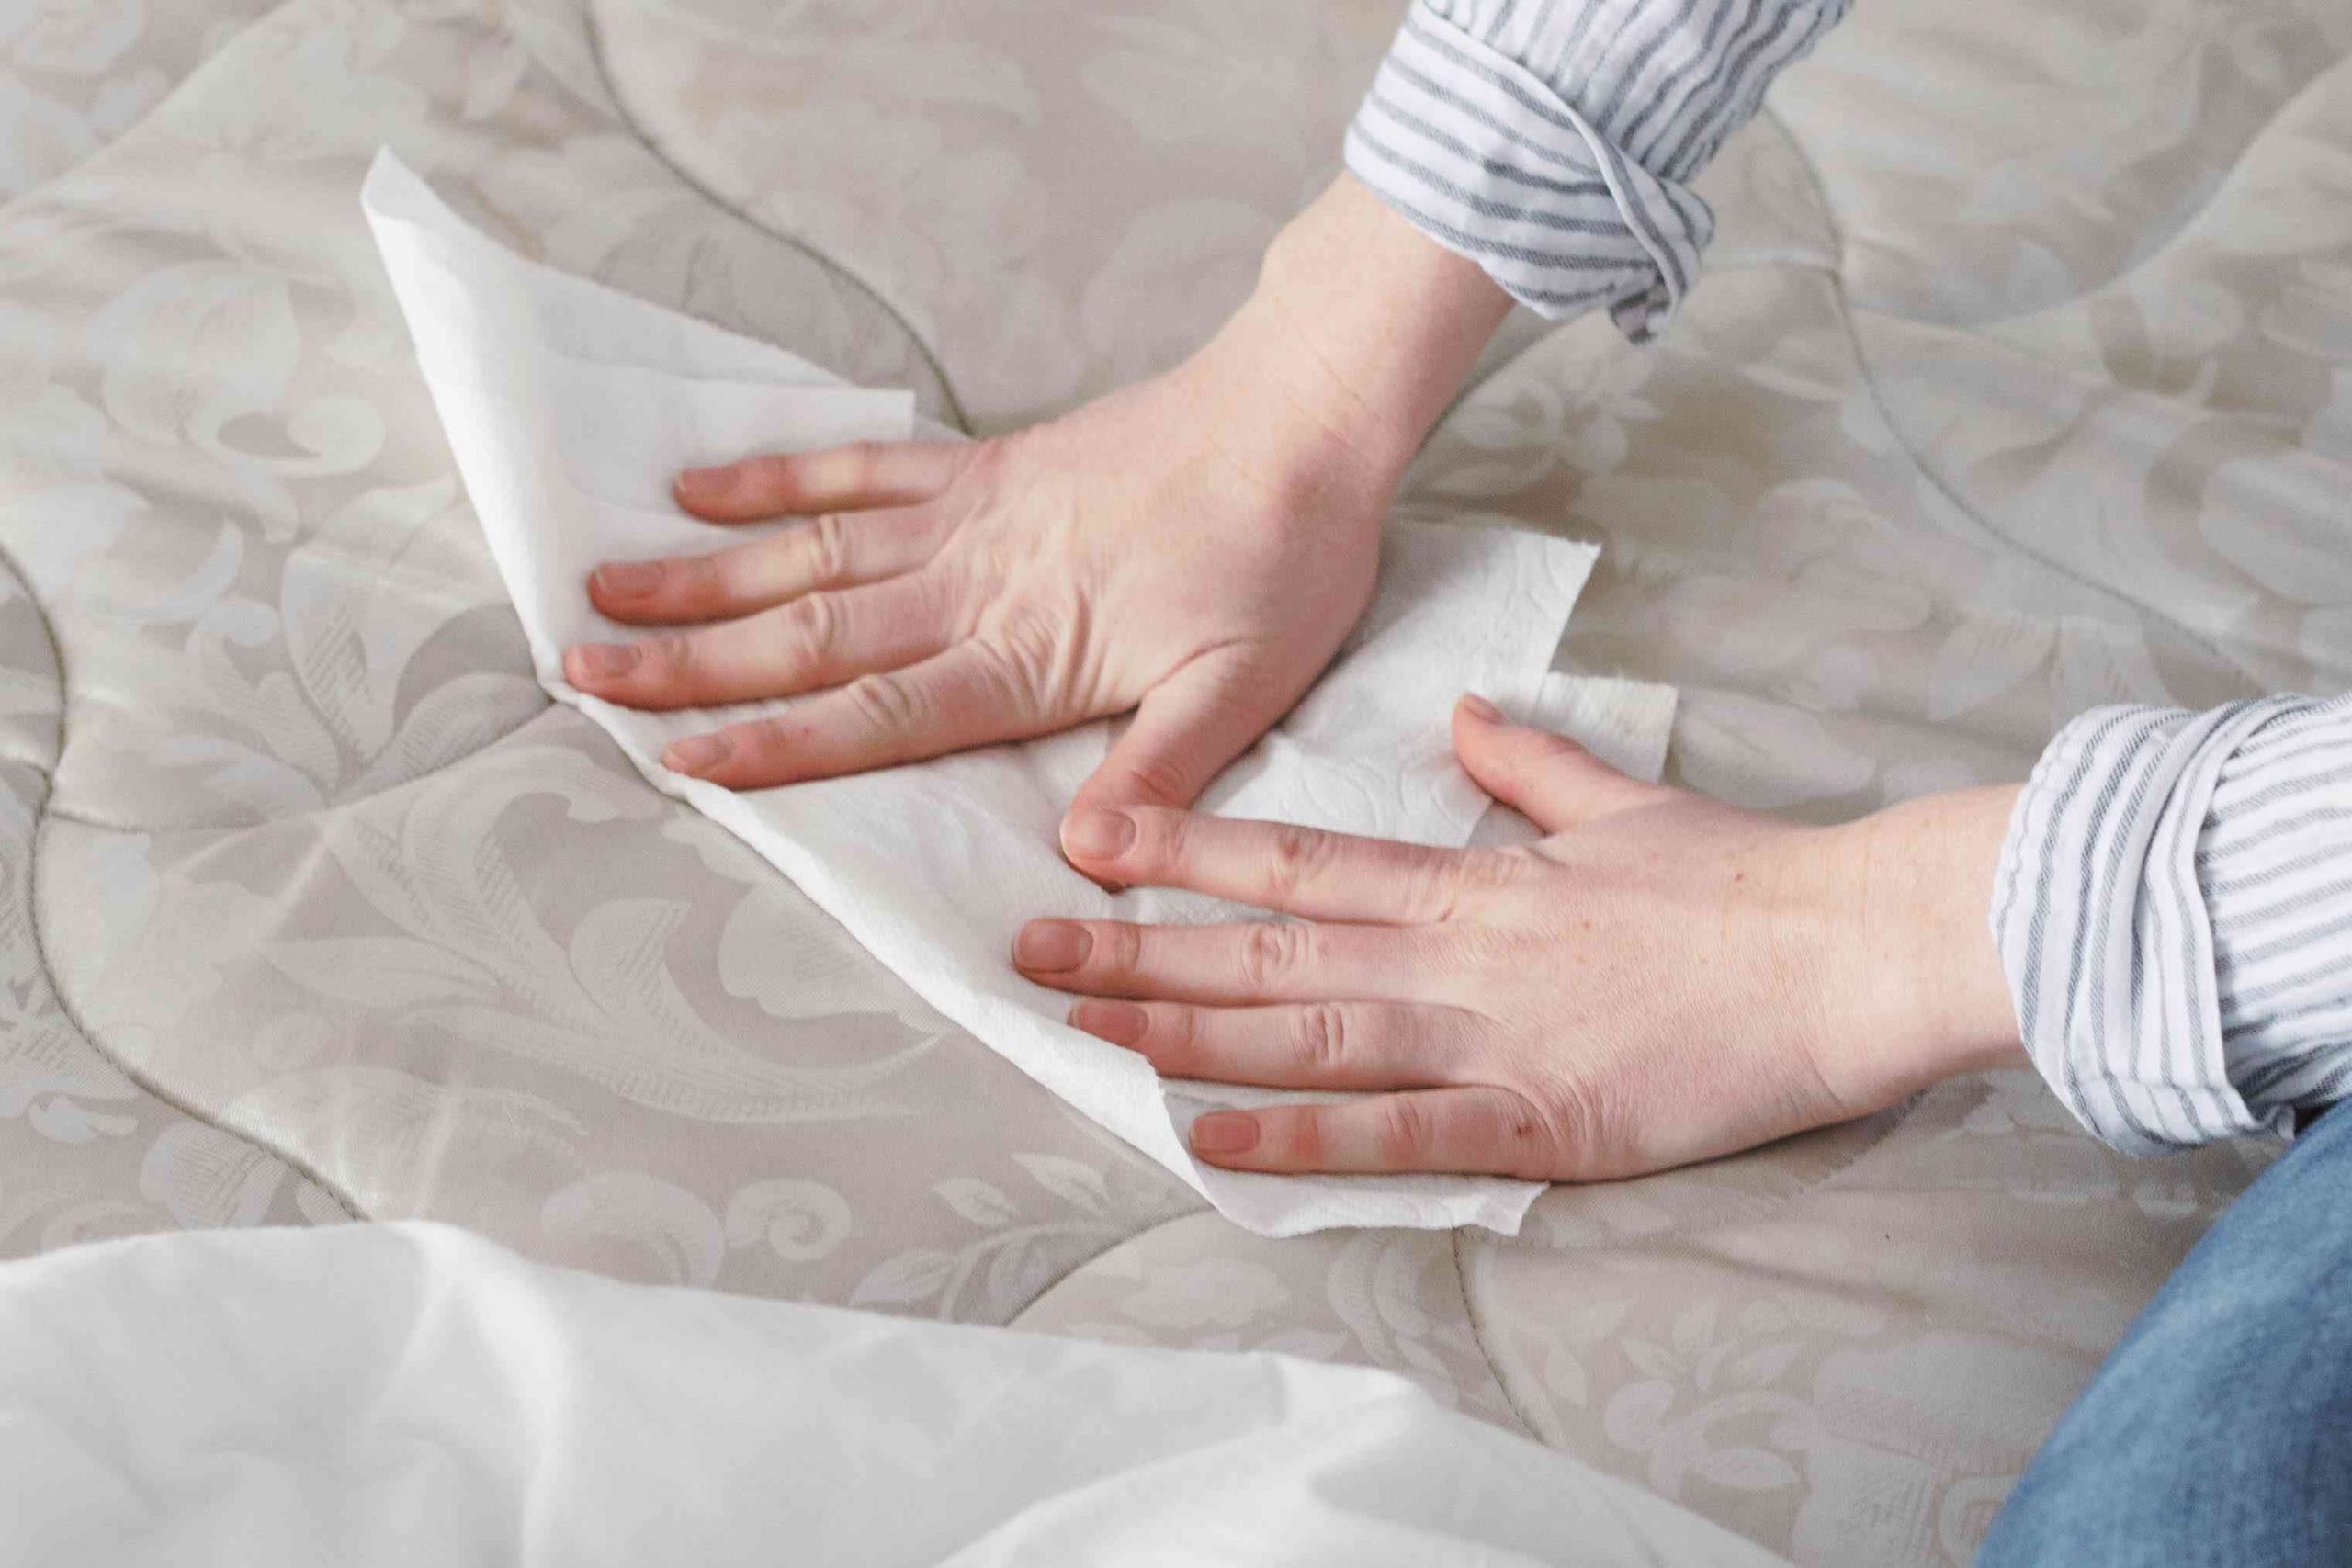 How to Remove Urine Stains and Odors From Mattresses